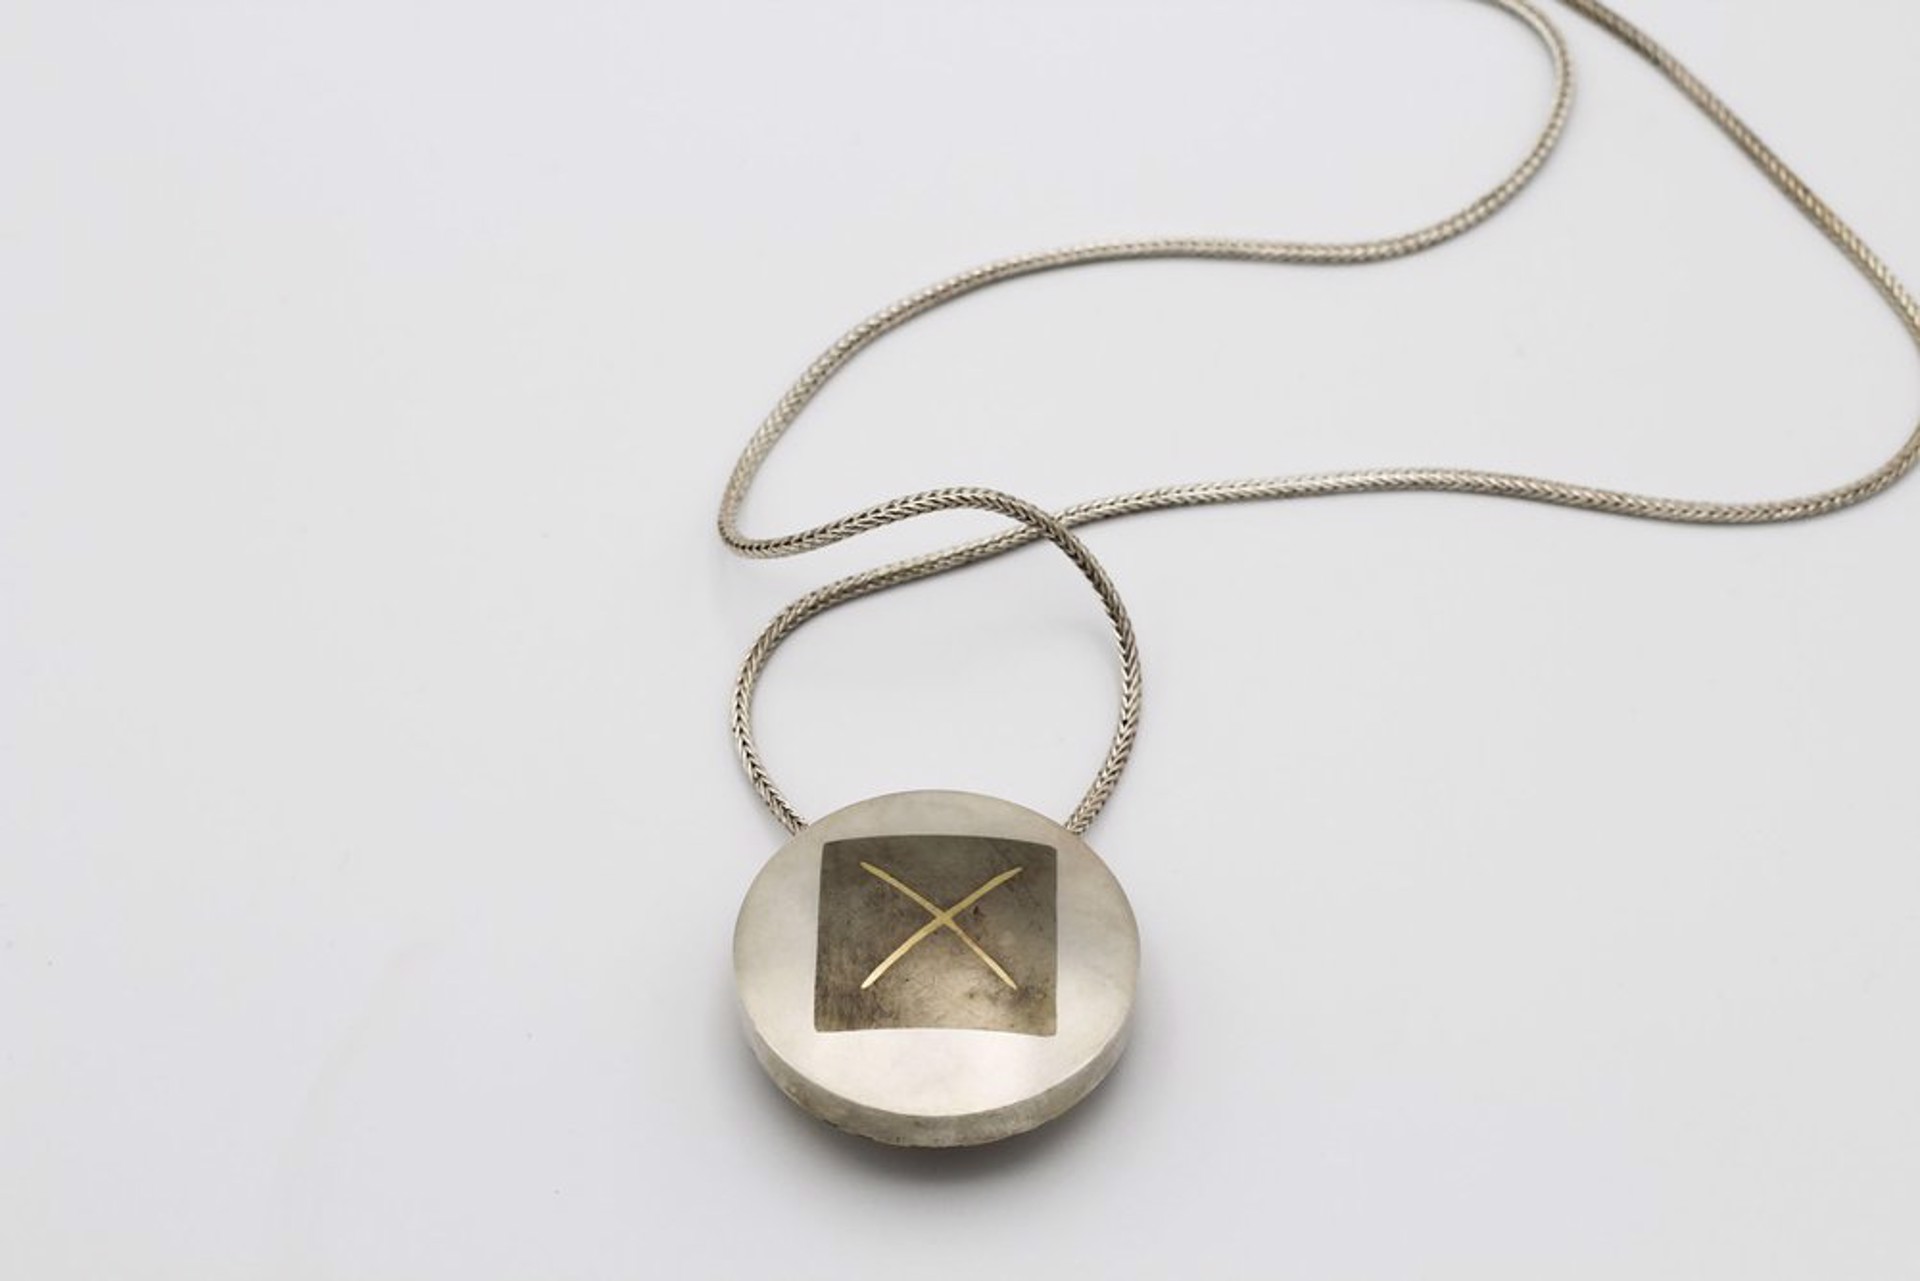 Two-sided Pendant by Lisa Gralnick